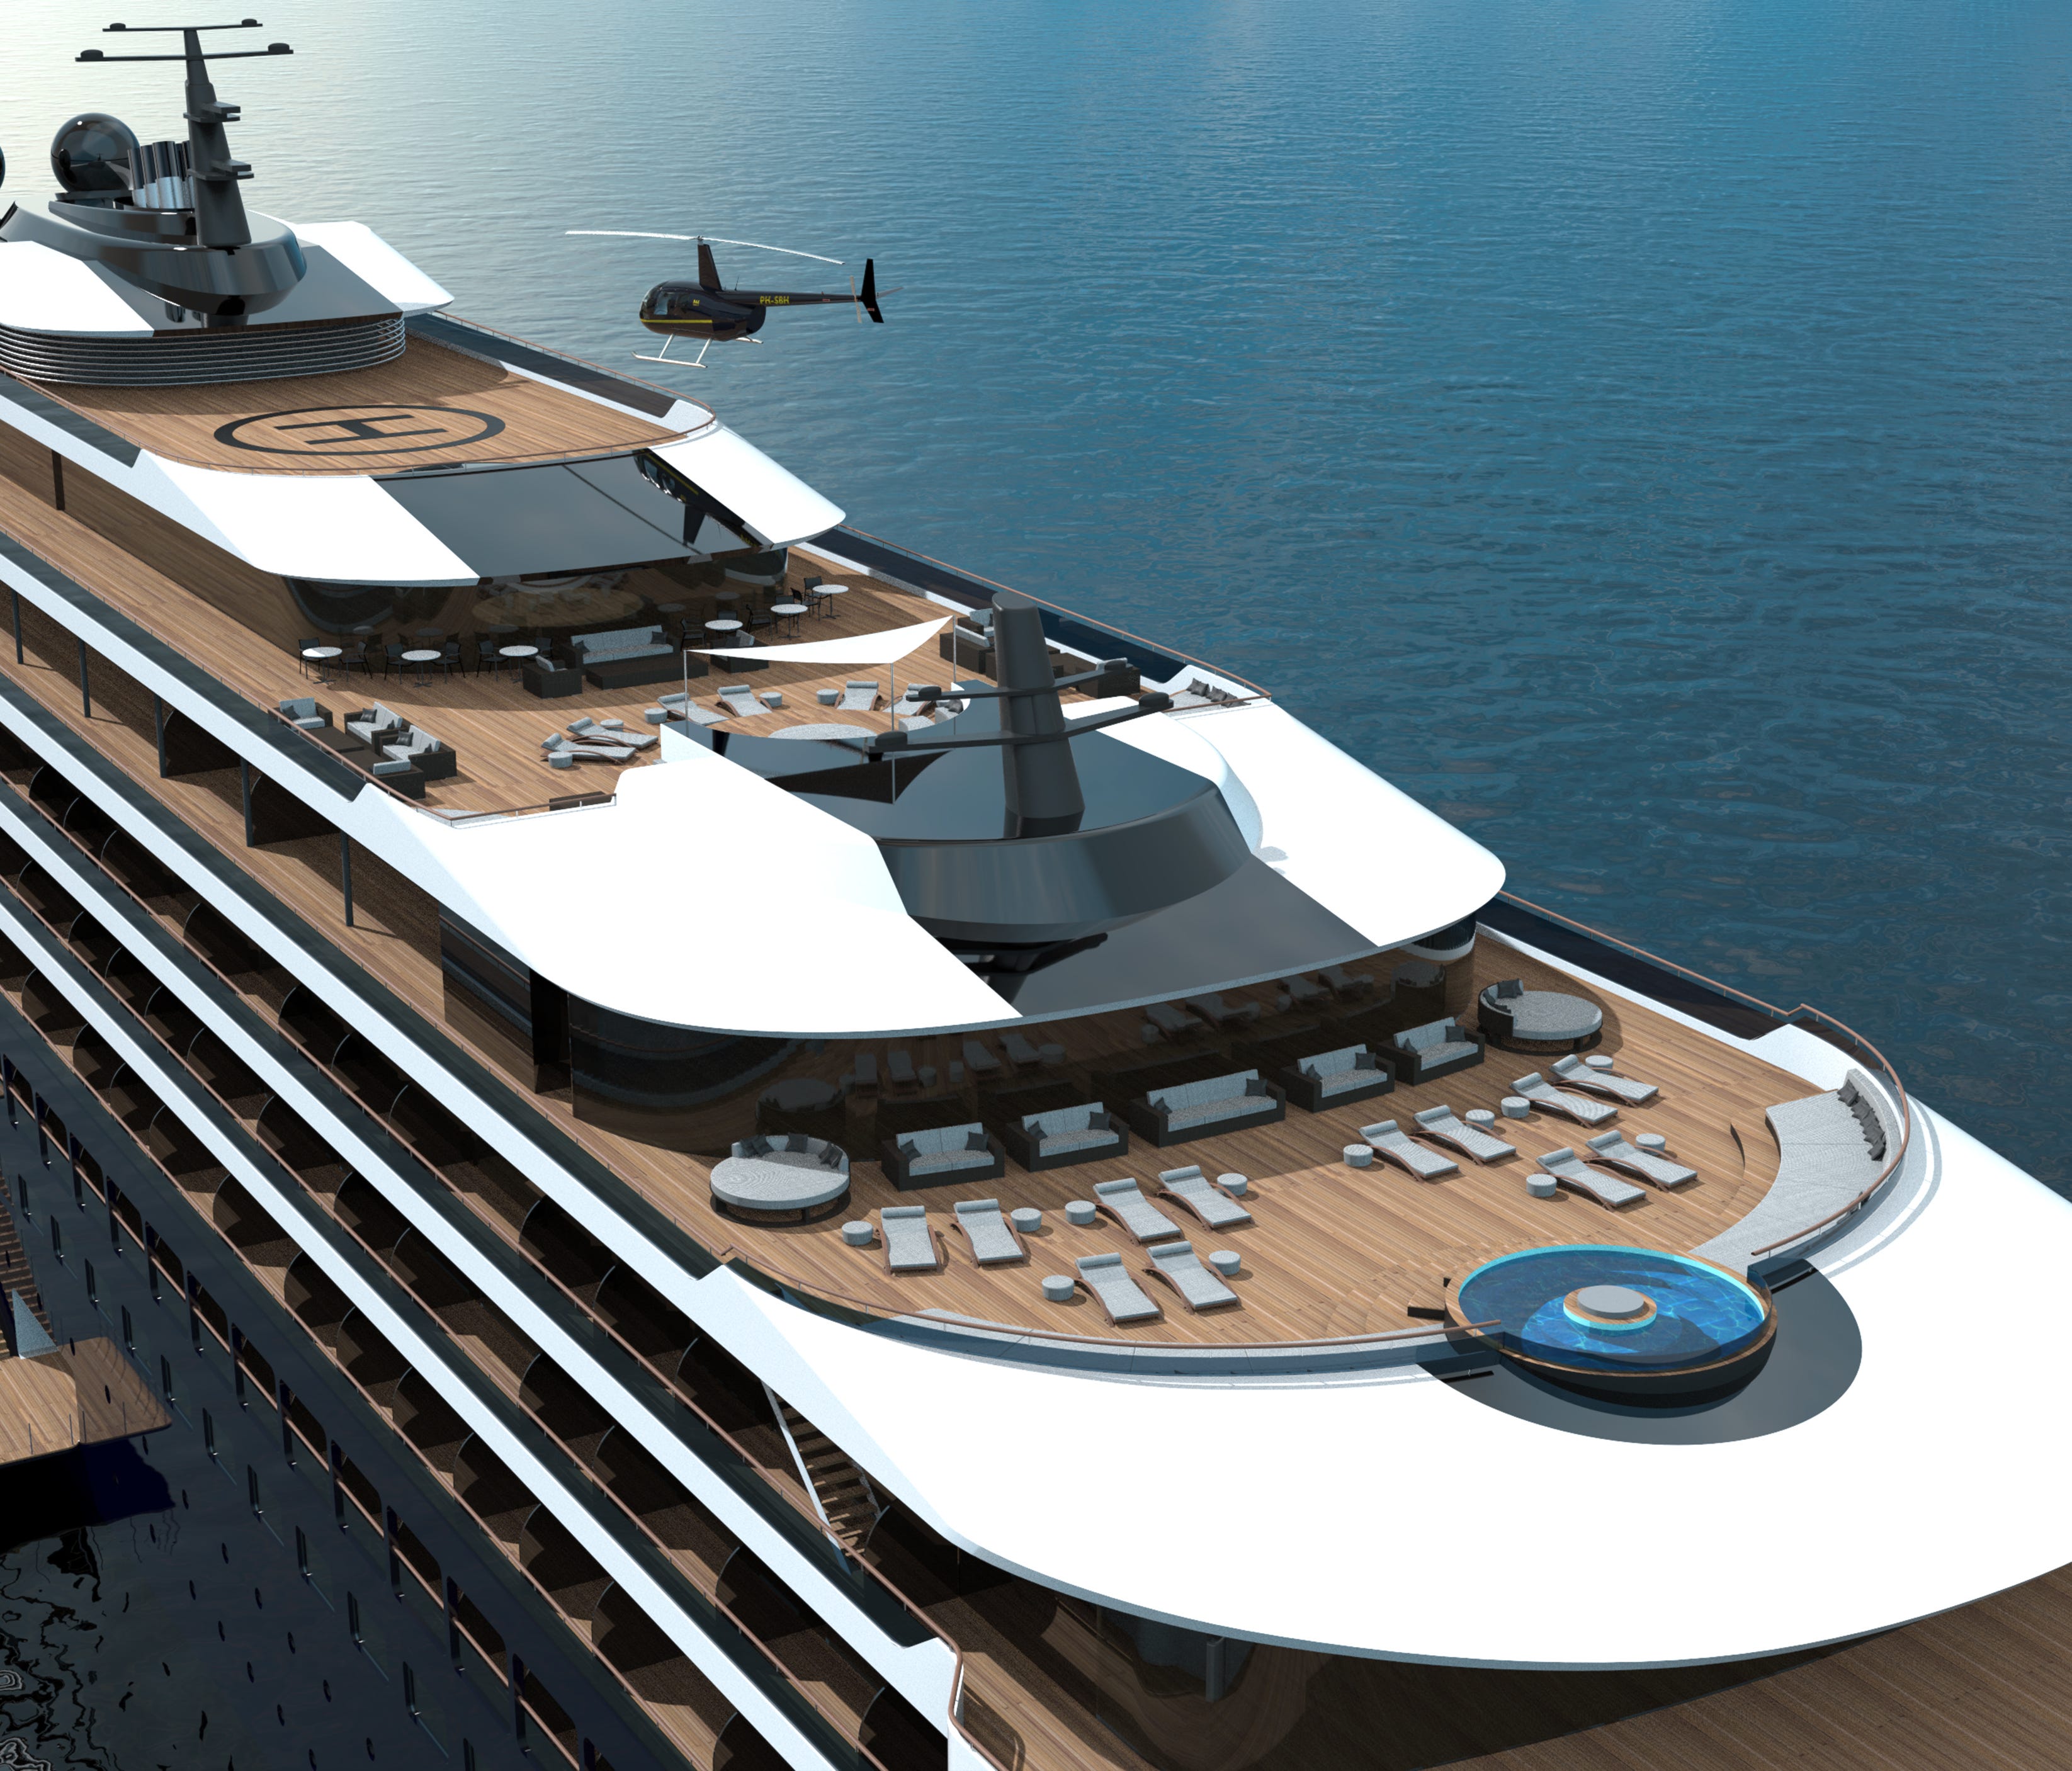 The Ritz-Carlton is getting into the yachting business with a fleet of three vessels.